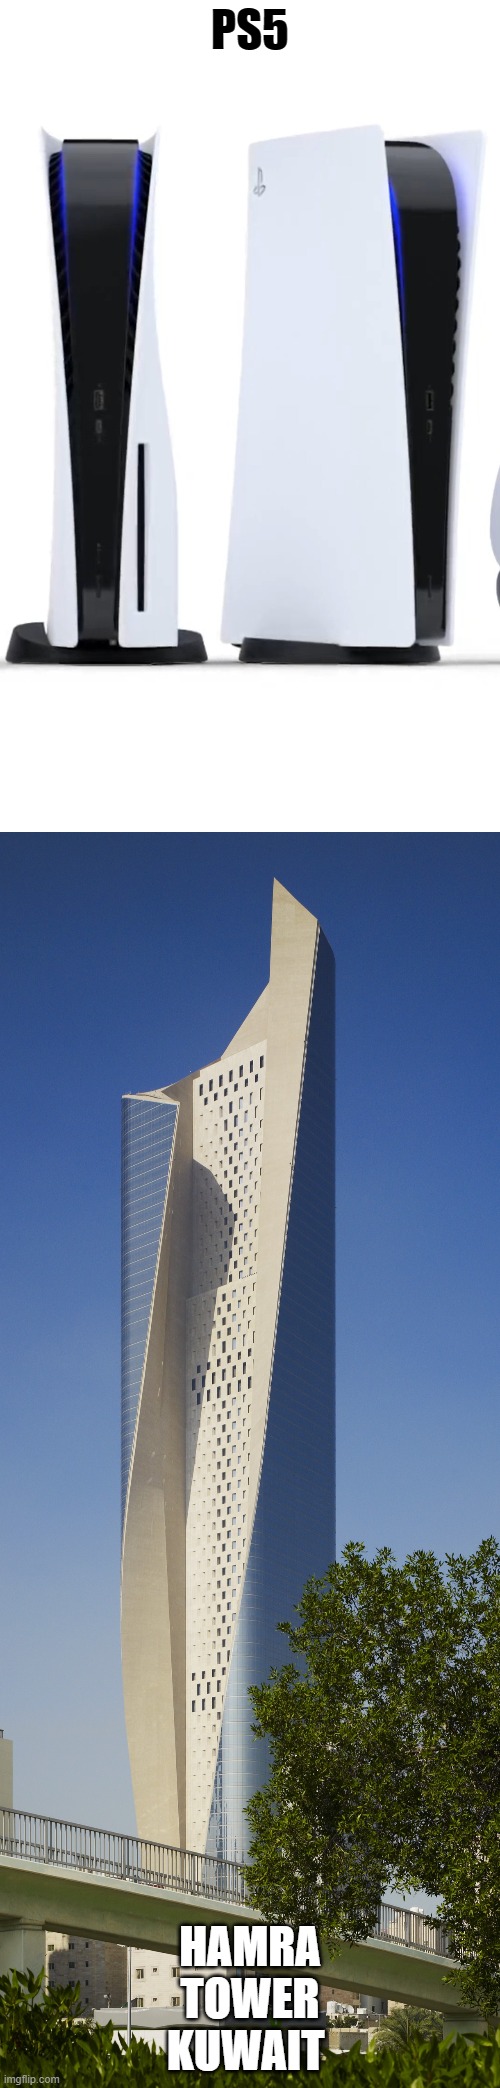 PS5; HAMRA TOWER KUWAIT | image tagged in memes | made w/ Imgflip meme maker